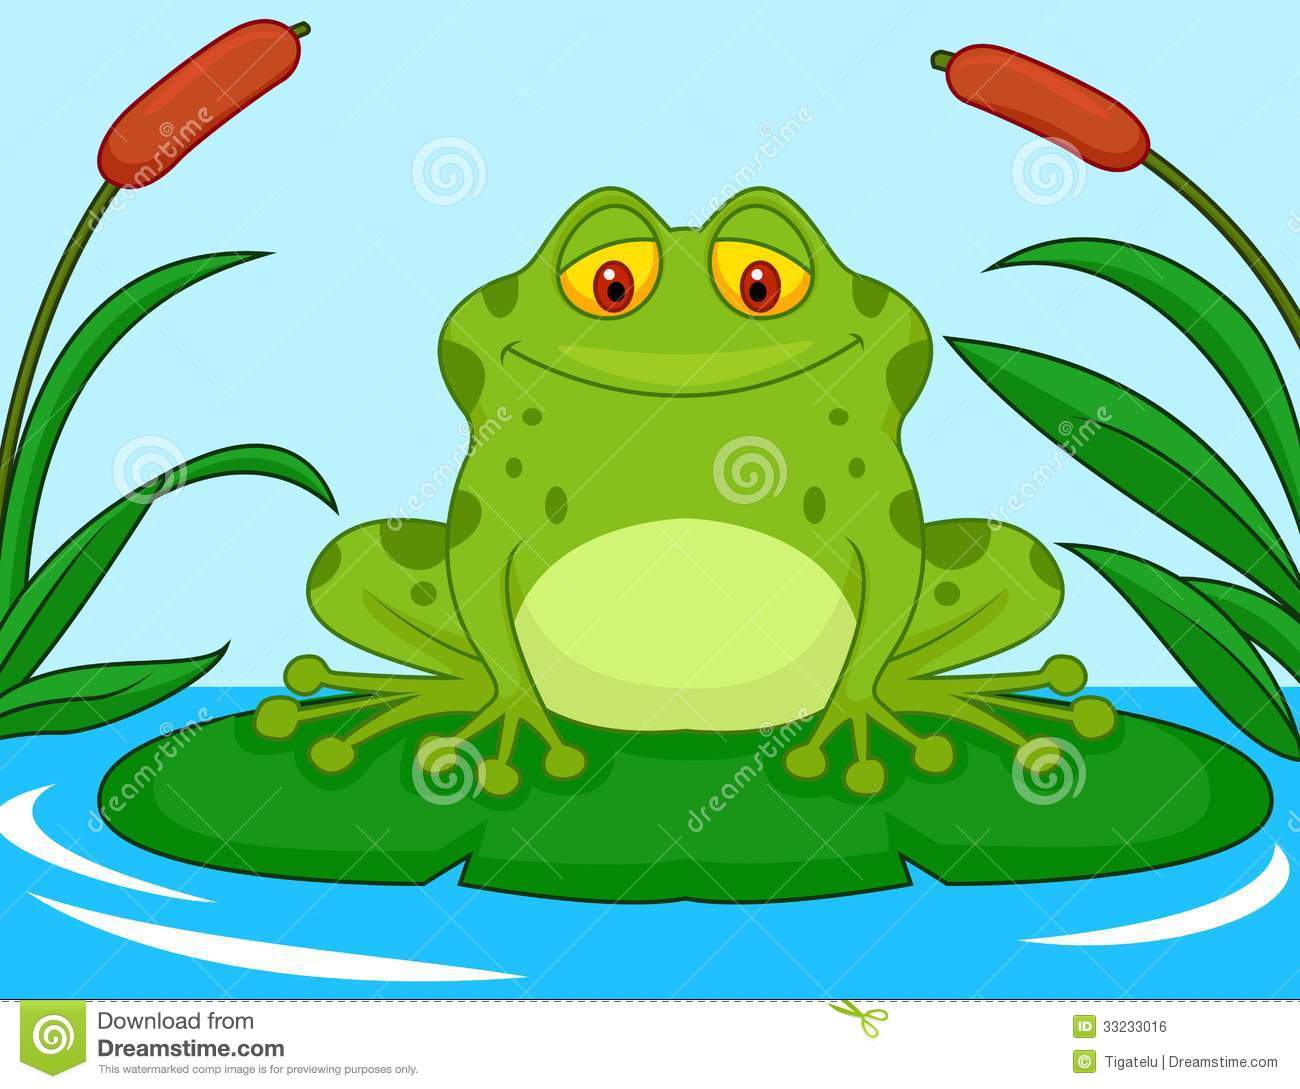 Clipart Frog On Lily Pad Frog Cartoon On A Lily Pad